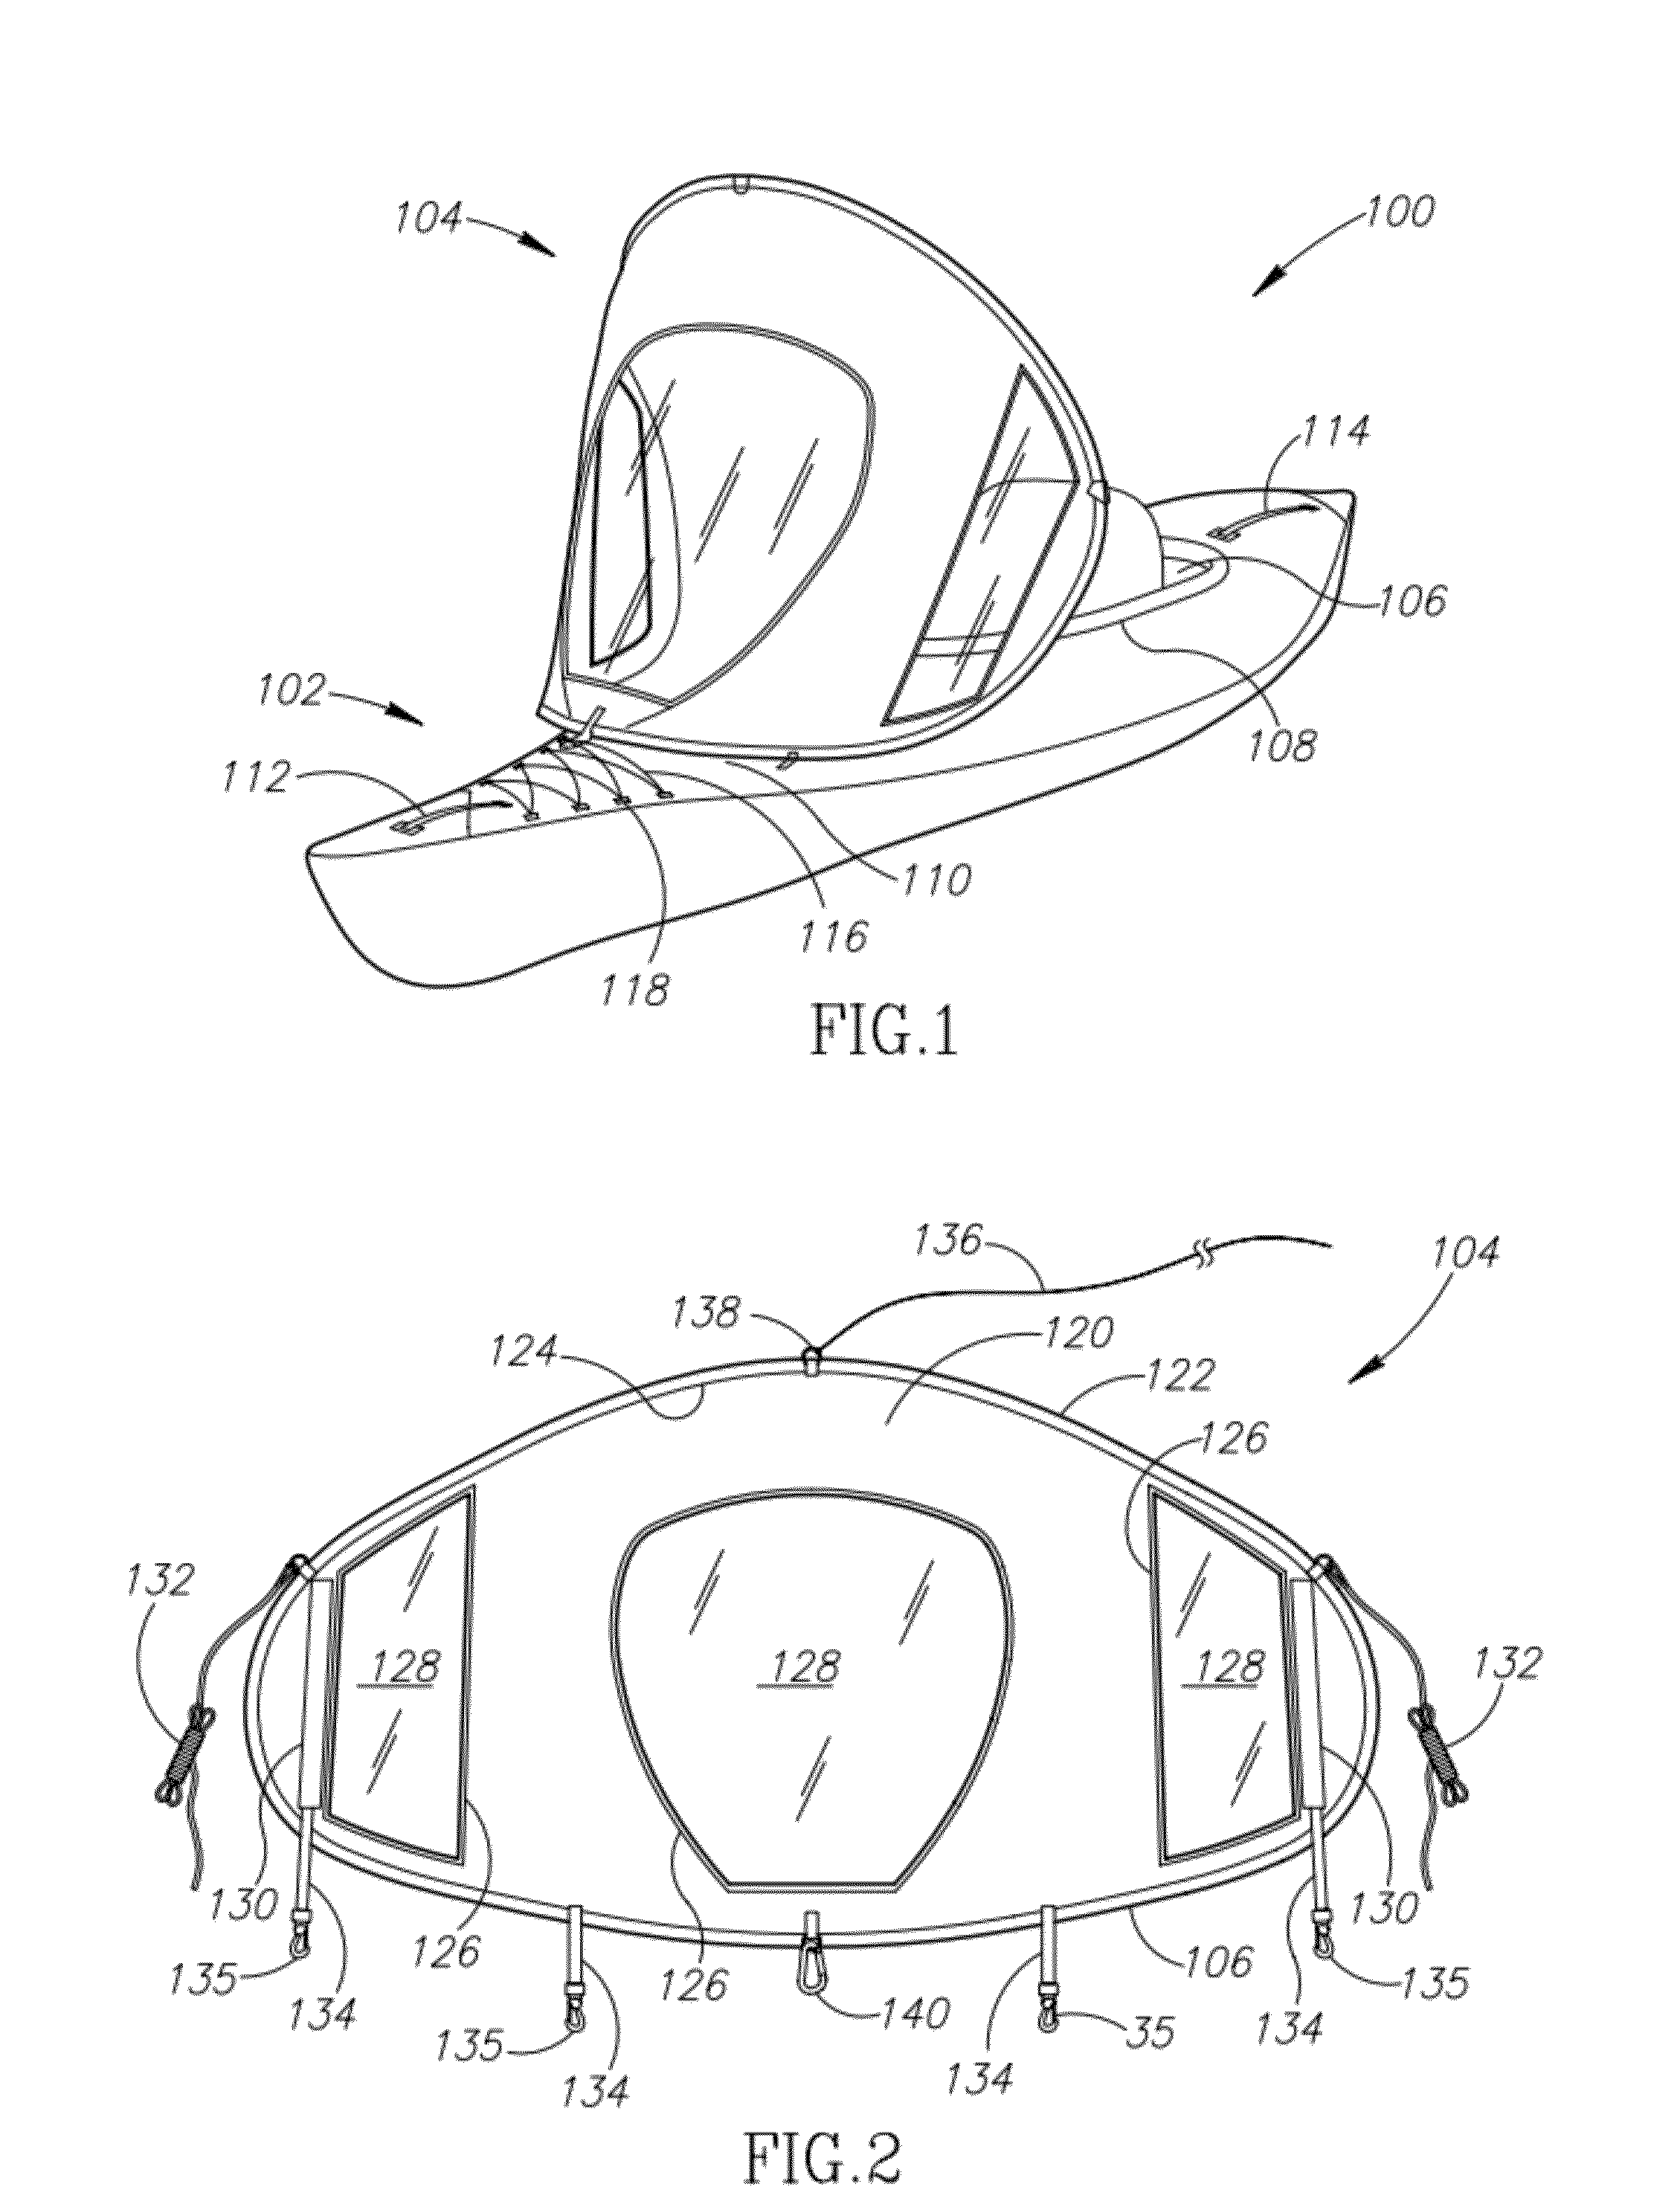 Portable sail for paddle-type vessels